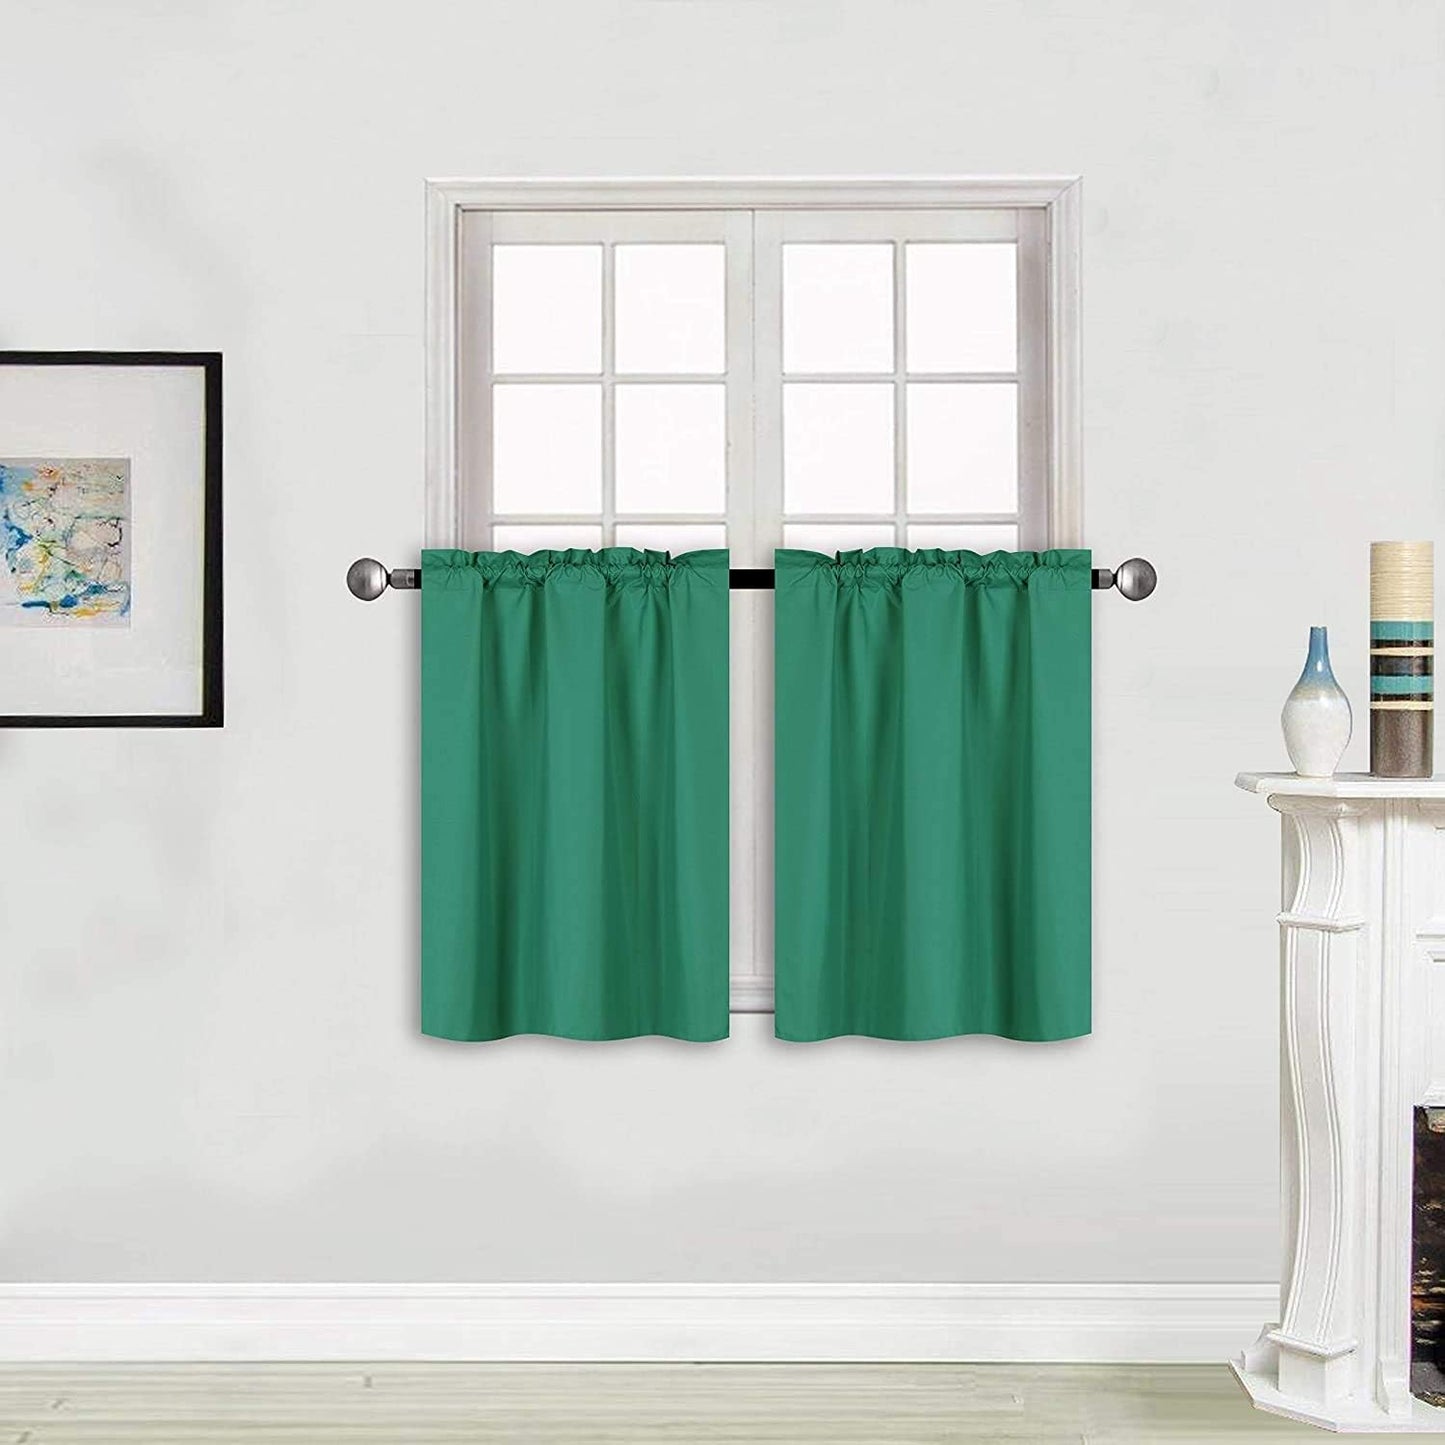 Home Collection 2 Panels 100% Blackout Curtain Set Solid Color with Rod Pocket Short Tier Drapes for Kitchen, Dinning Room, Bathroom, Bedroom,Living Room Window New (58” Wide X 23” Long, Black)  Kids Zone home Linen Teal 58” Wide X 23” Long 